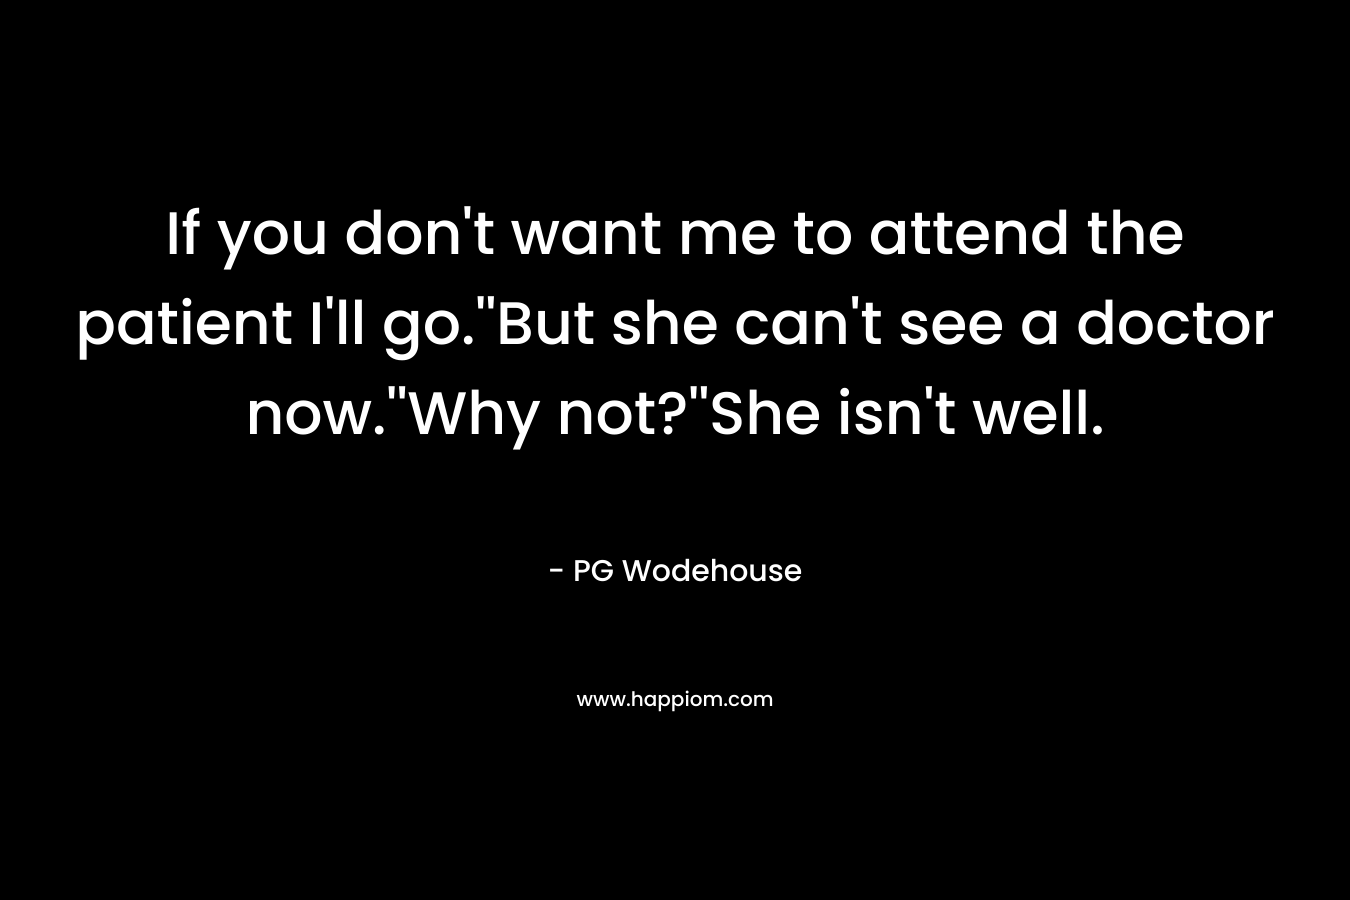 If you don’t want me to attend the patient I’ll go.”But she can’t see a doctor now.”Why not?”She isn’t well. – PG Wodehouse